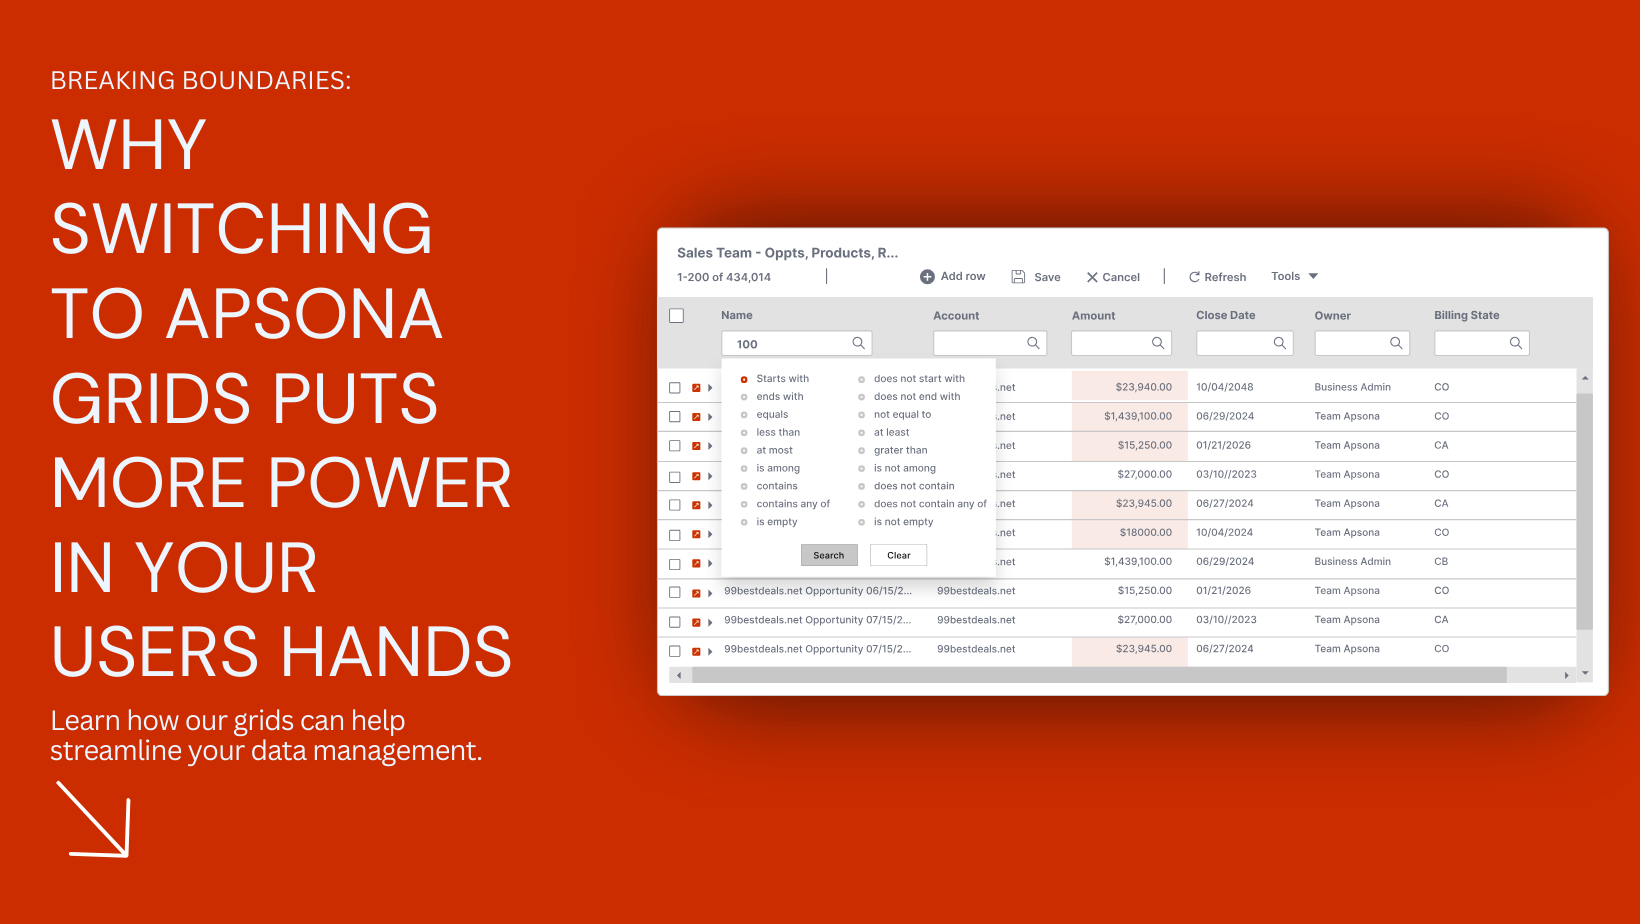 Breaking Boundaries: Why Switching to Apsona Grids Puts More Power in Your Users Hands